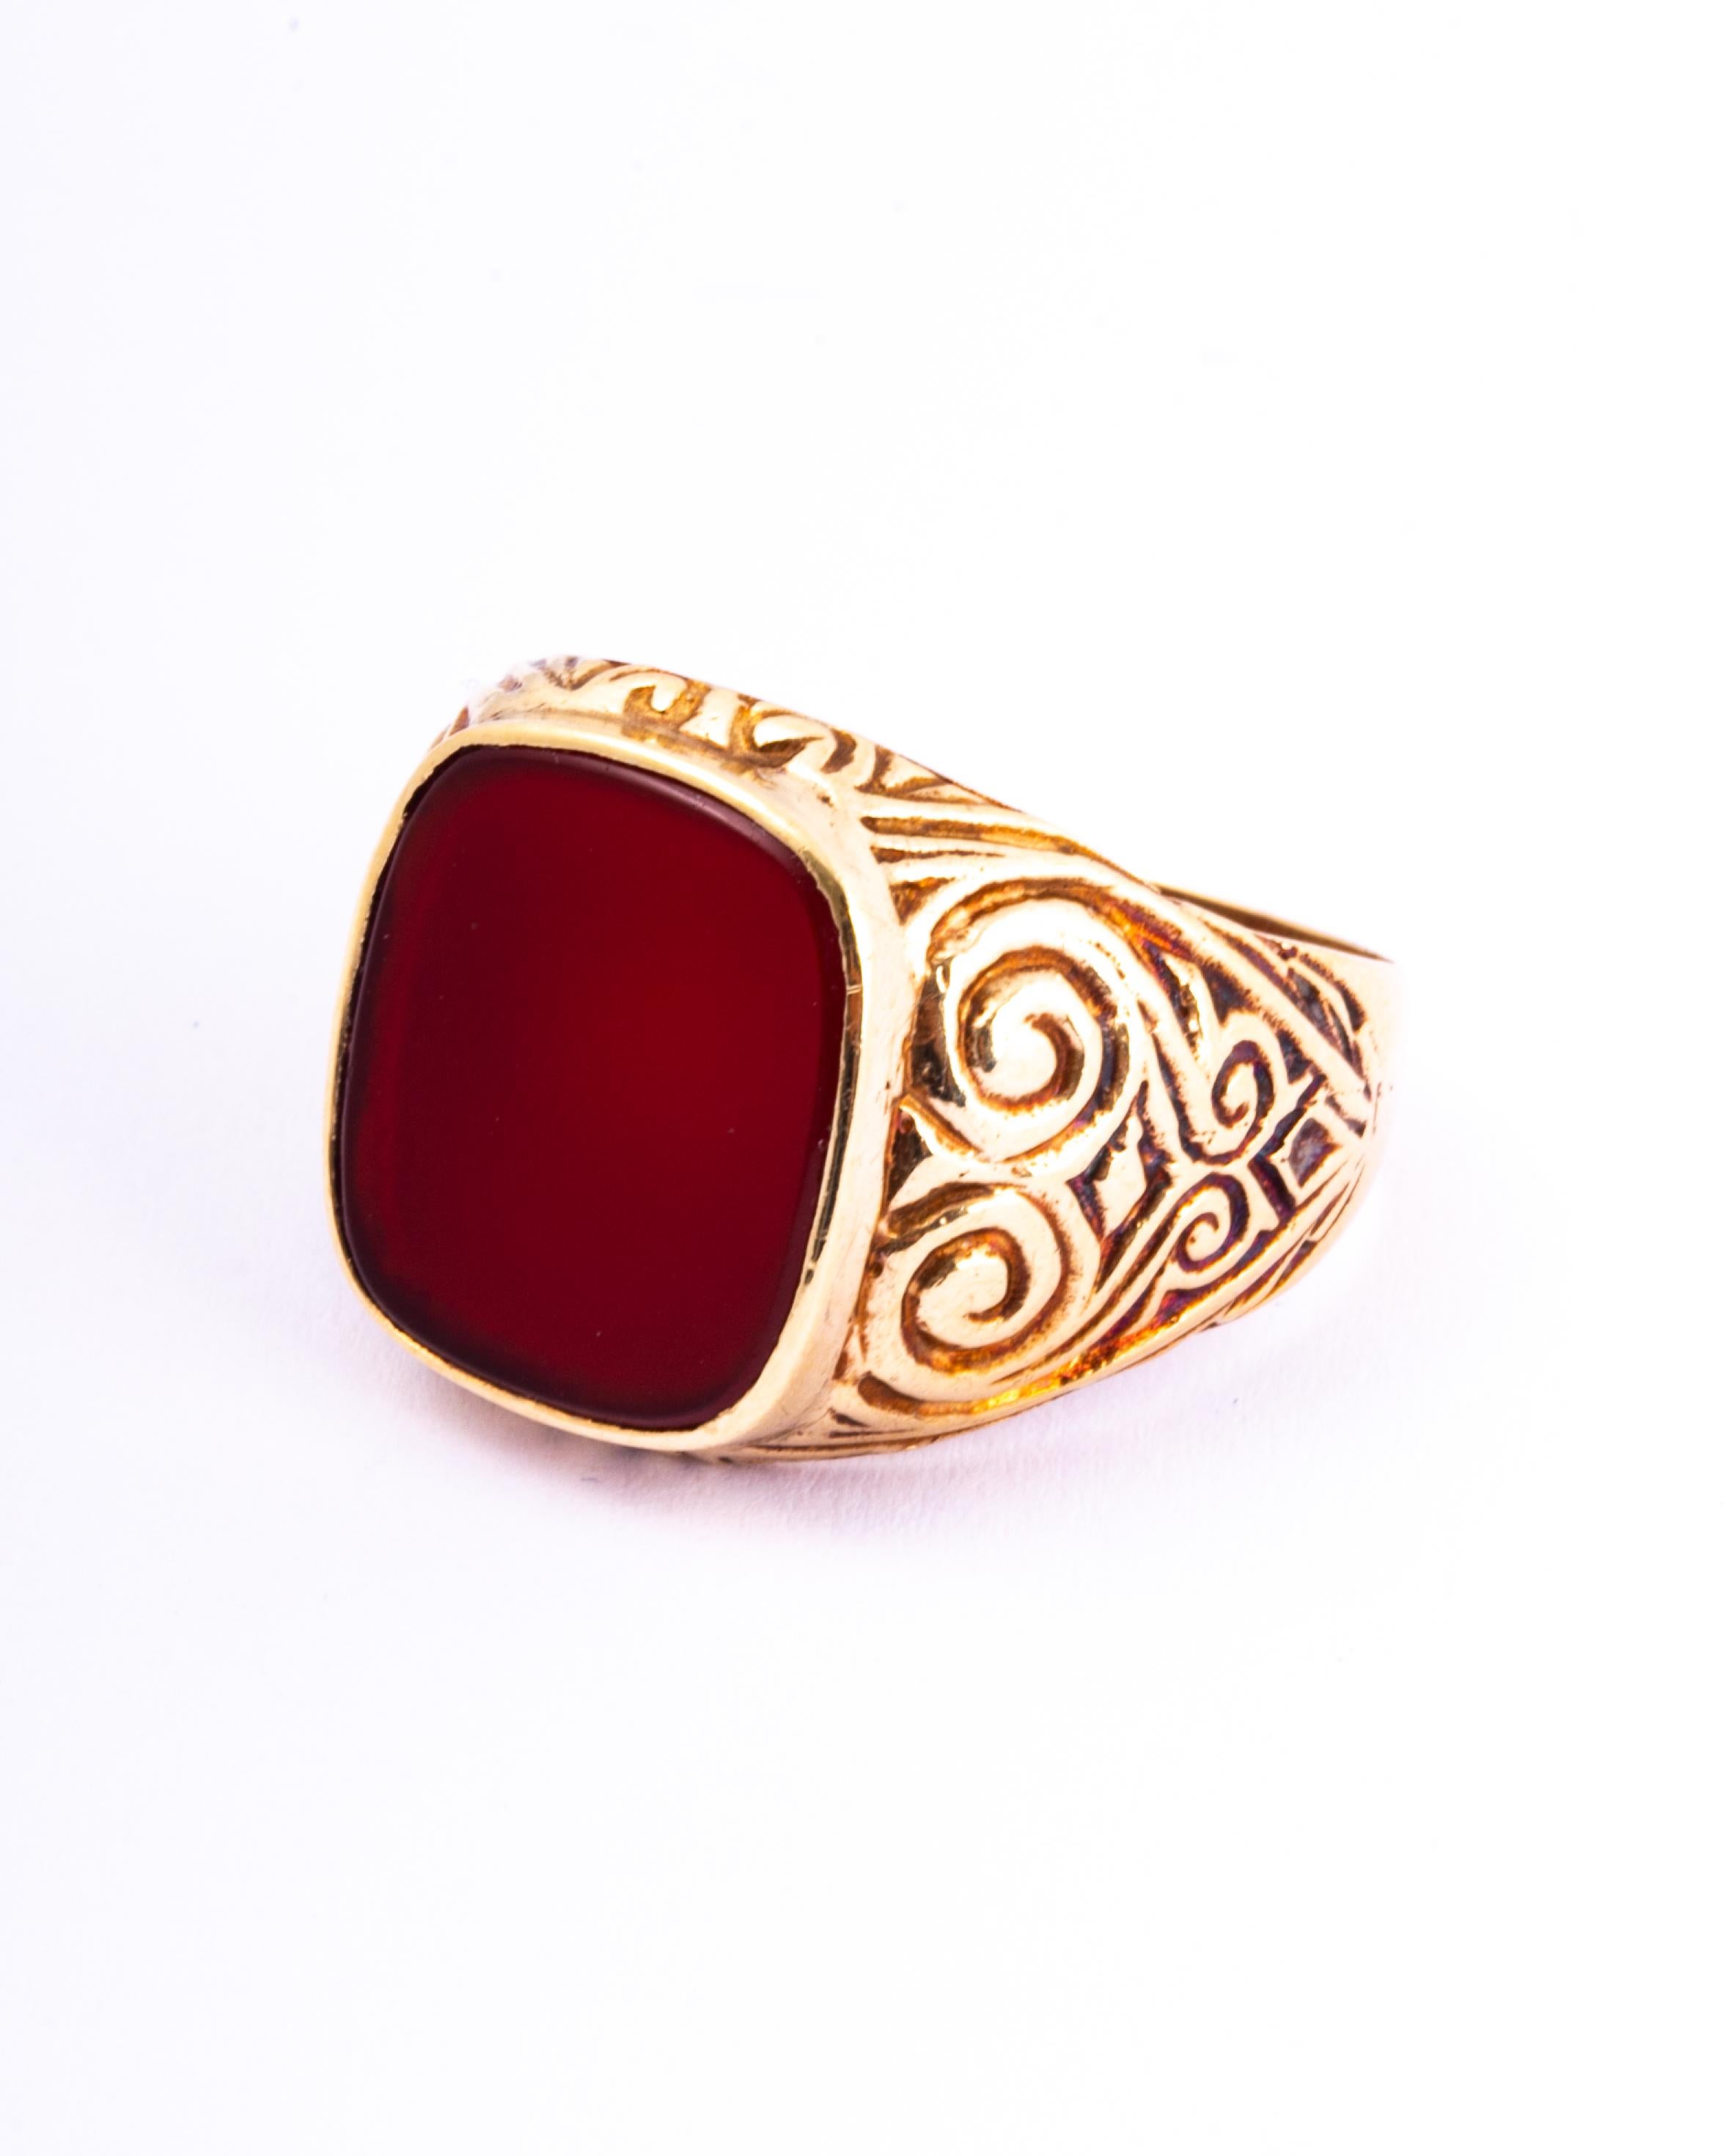 The shoulders on this are to die for and the shape of the stone stunning! The carnelian is a deep red/brown colour and is encased in a 9ct gold setting upon beautiful detailed shoulders. Made in Birmingham, England.

Ring Size: M 1/2 or 6 1/2
Stone